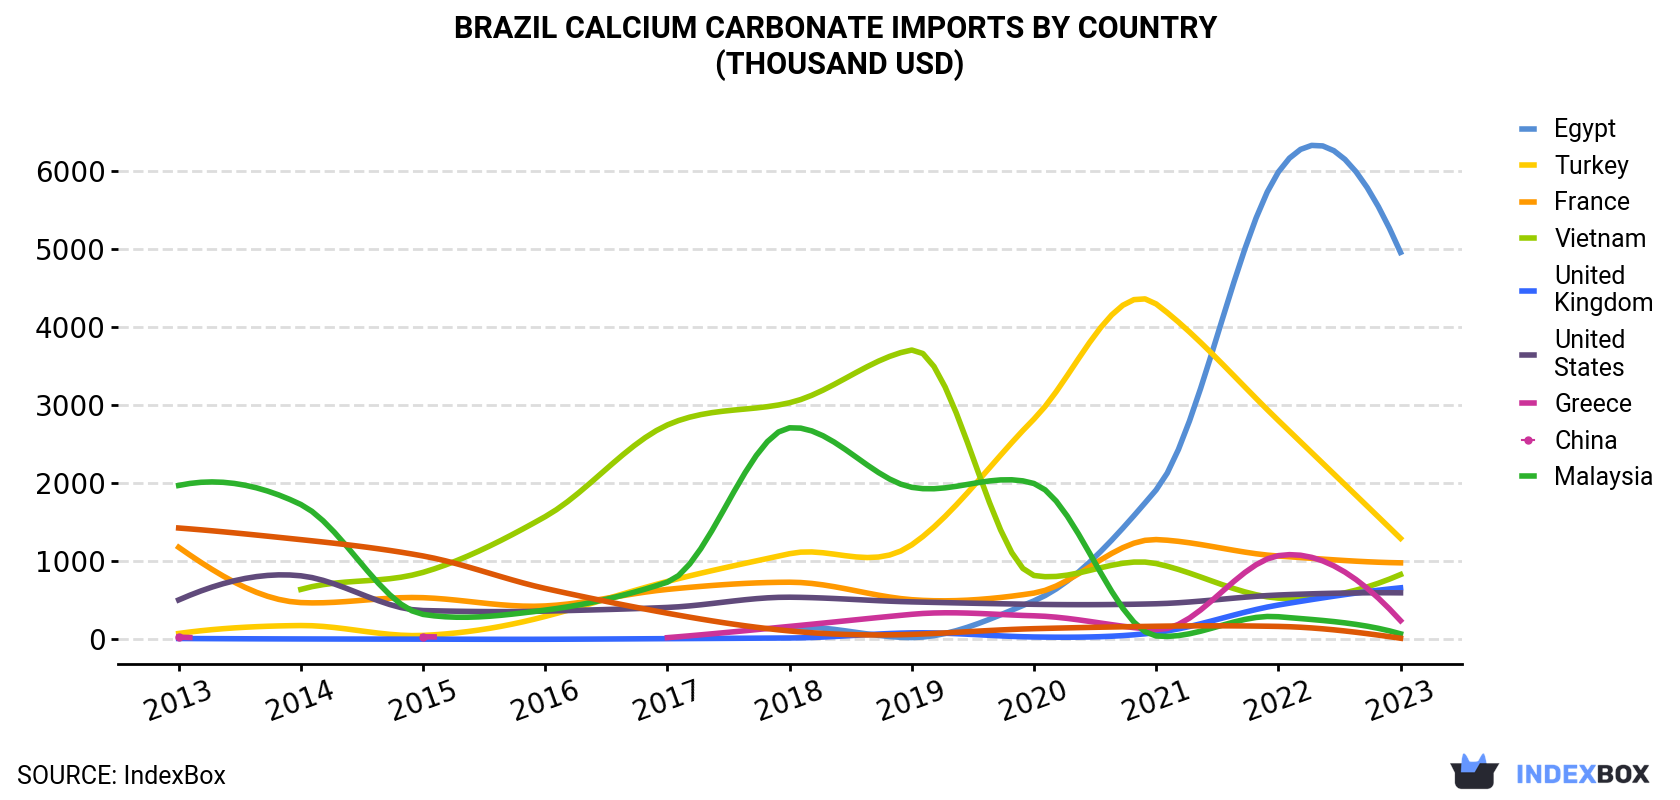 Brazil Calcium Carbonate Imports By Country (Thousand USD)